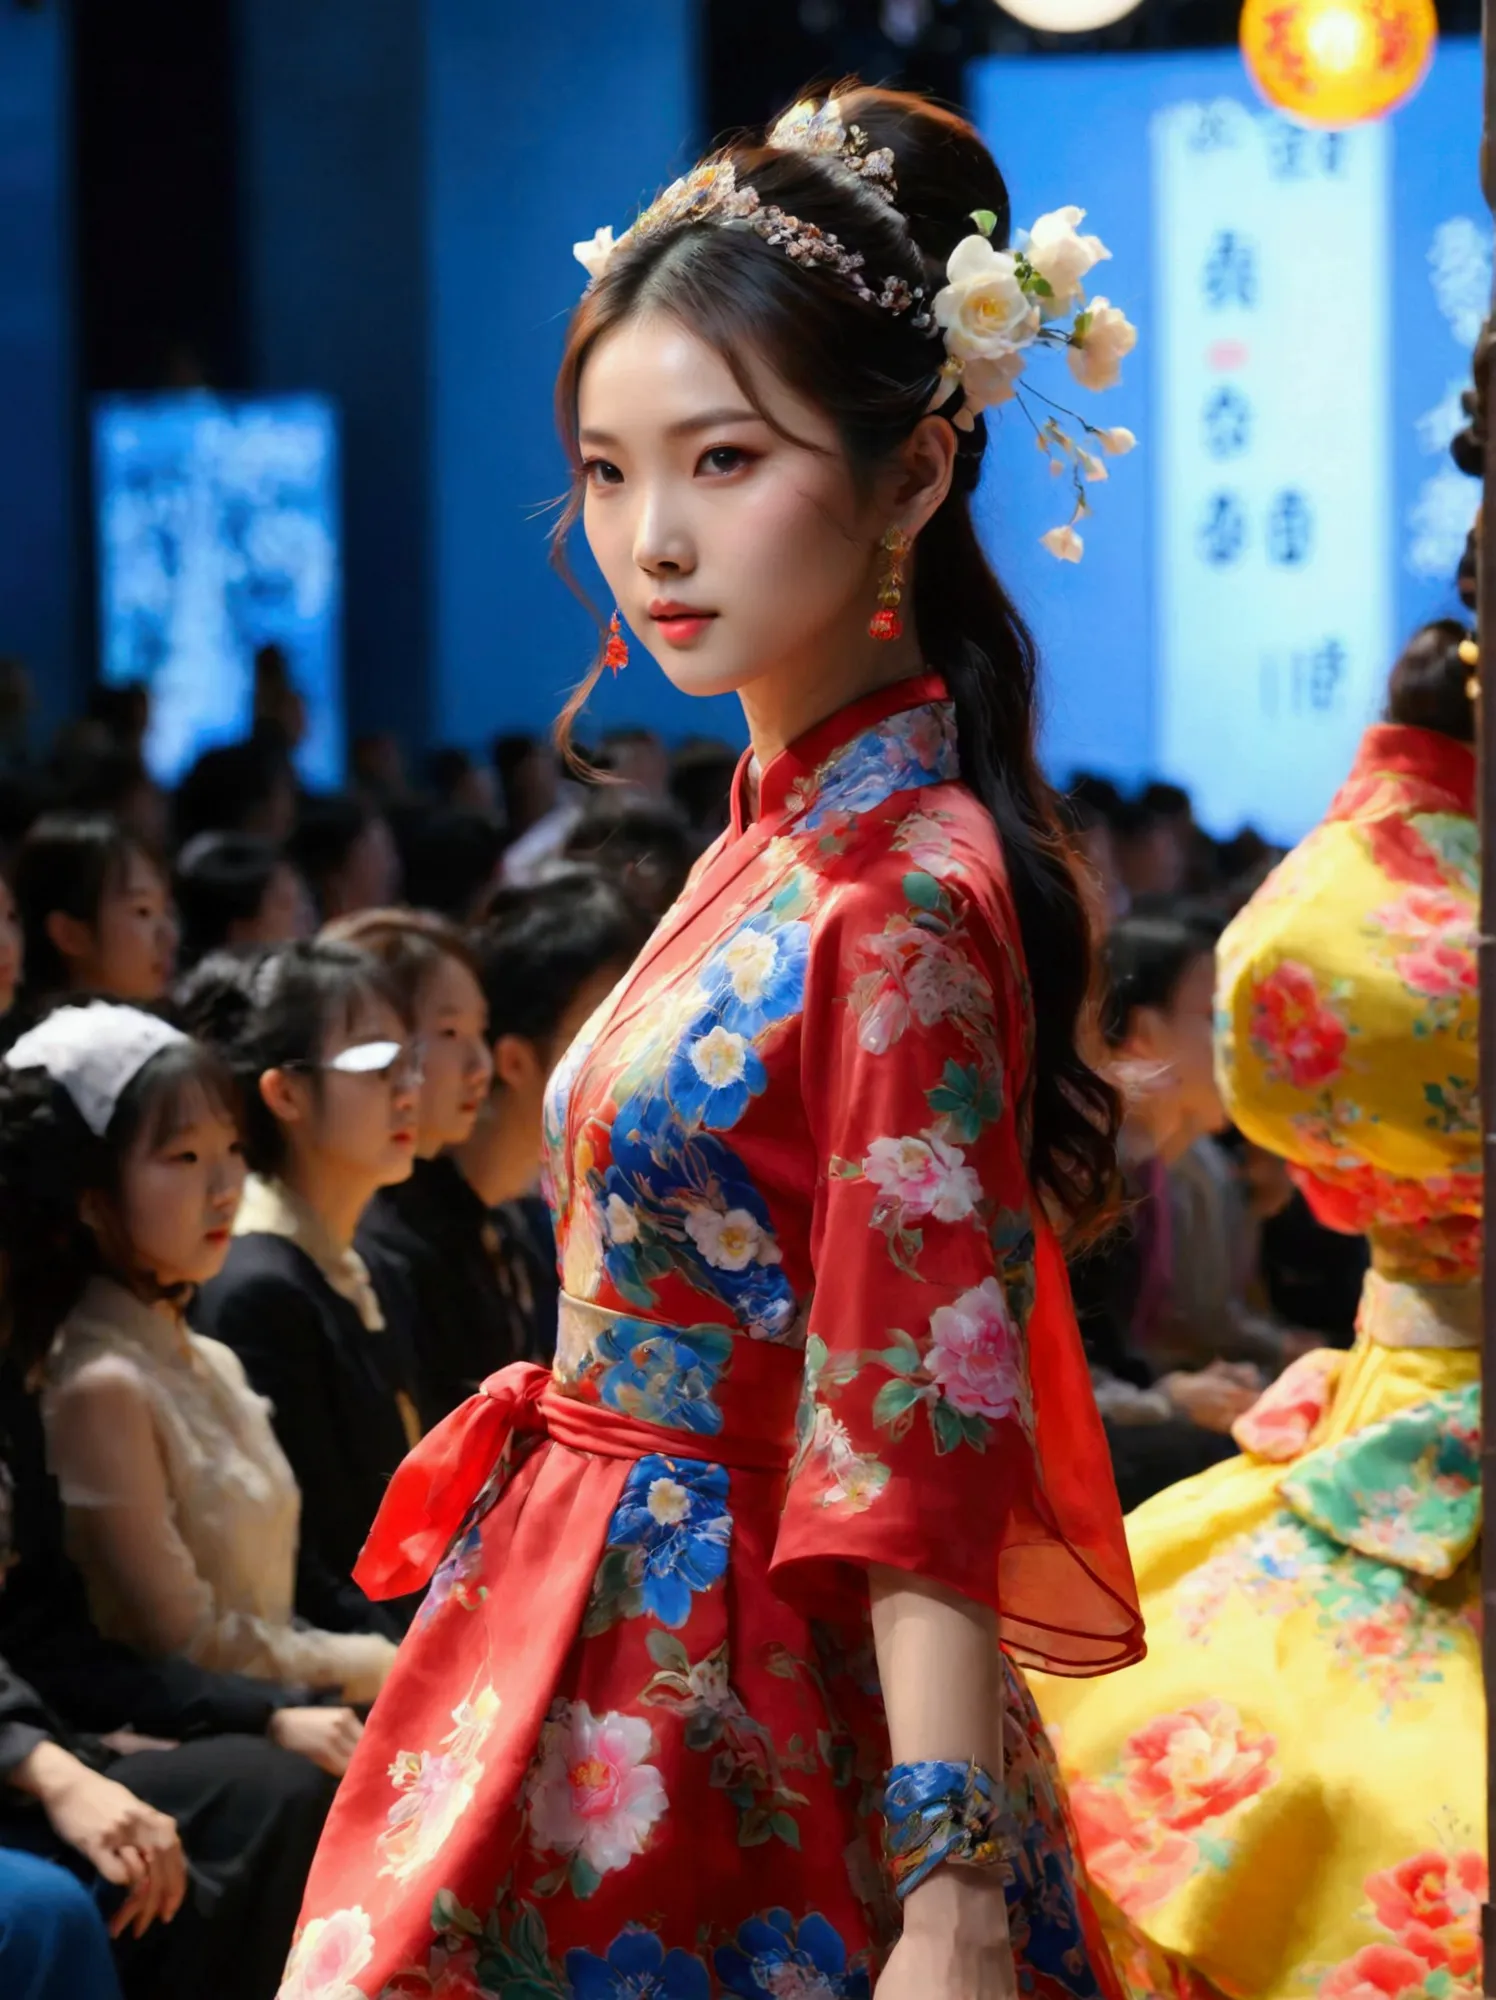 A model stands on the catwalk。This model is a beautiful Chinese girl，High fashion on display。The skirt she wore was exaggerated，...